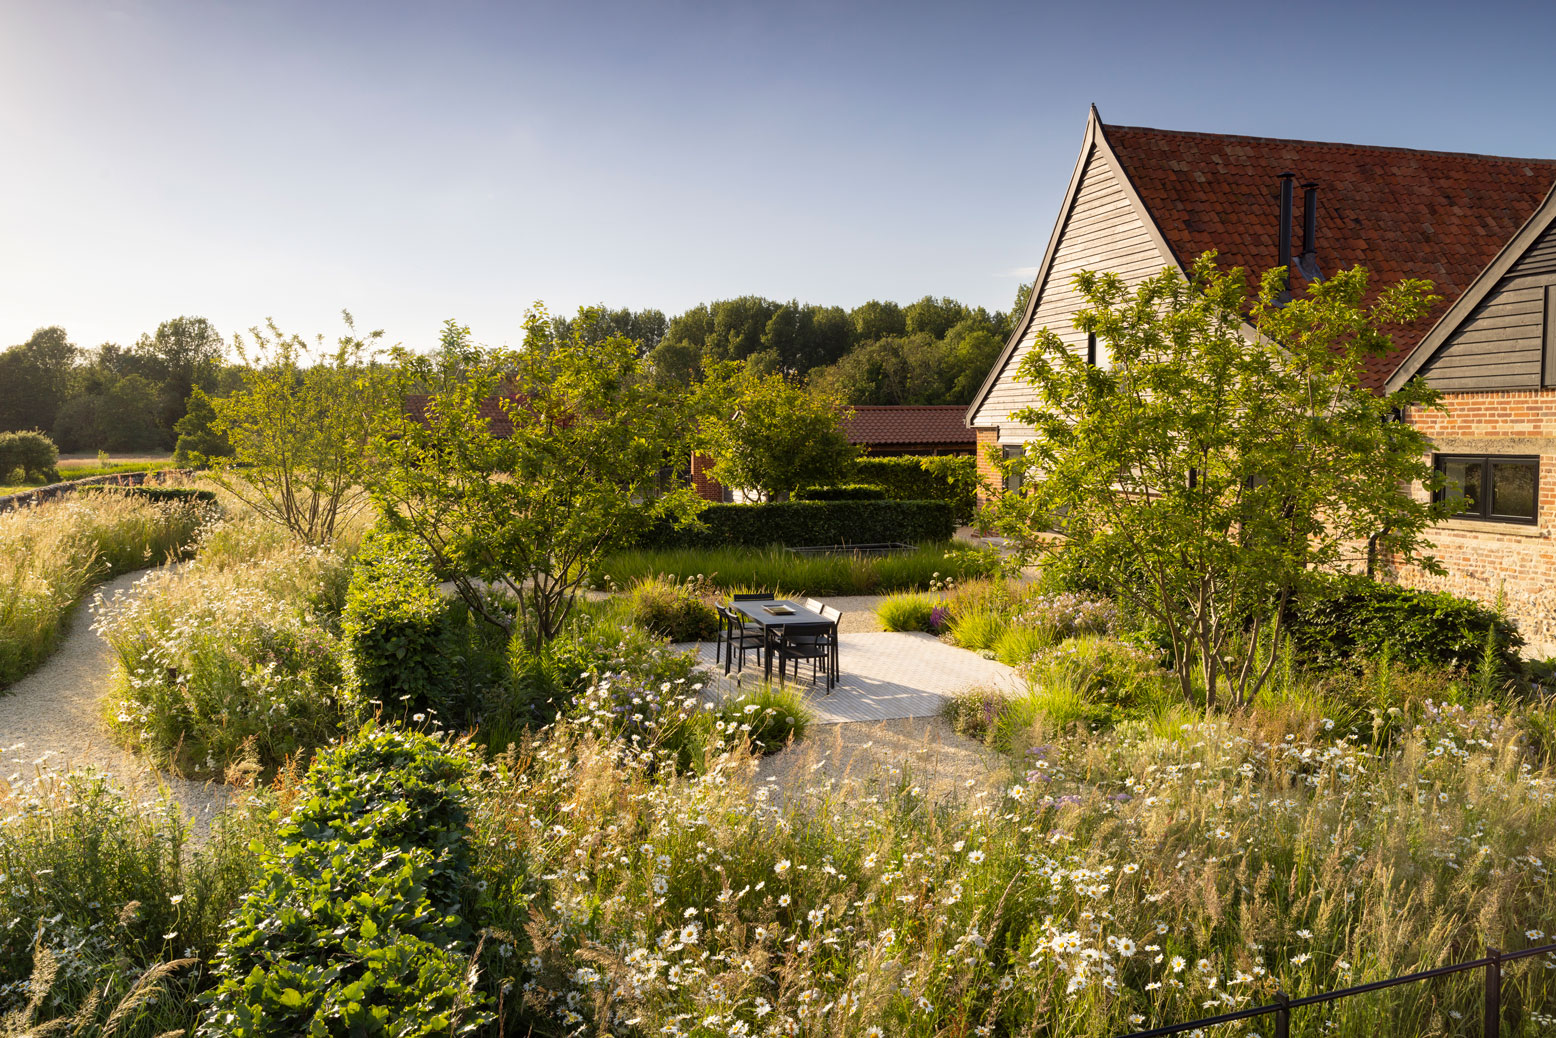 Colm Joseph suffolk garden converted barn modern home naturalistic planting design wildflower meadow beech hedge multi-stem crabapple trees seating area gravel paths